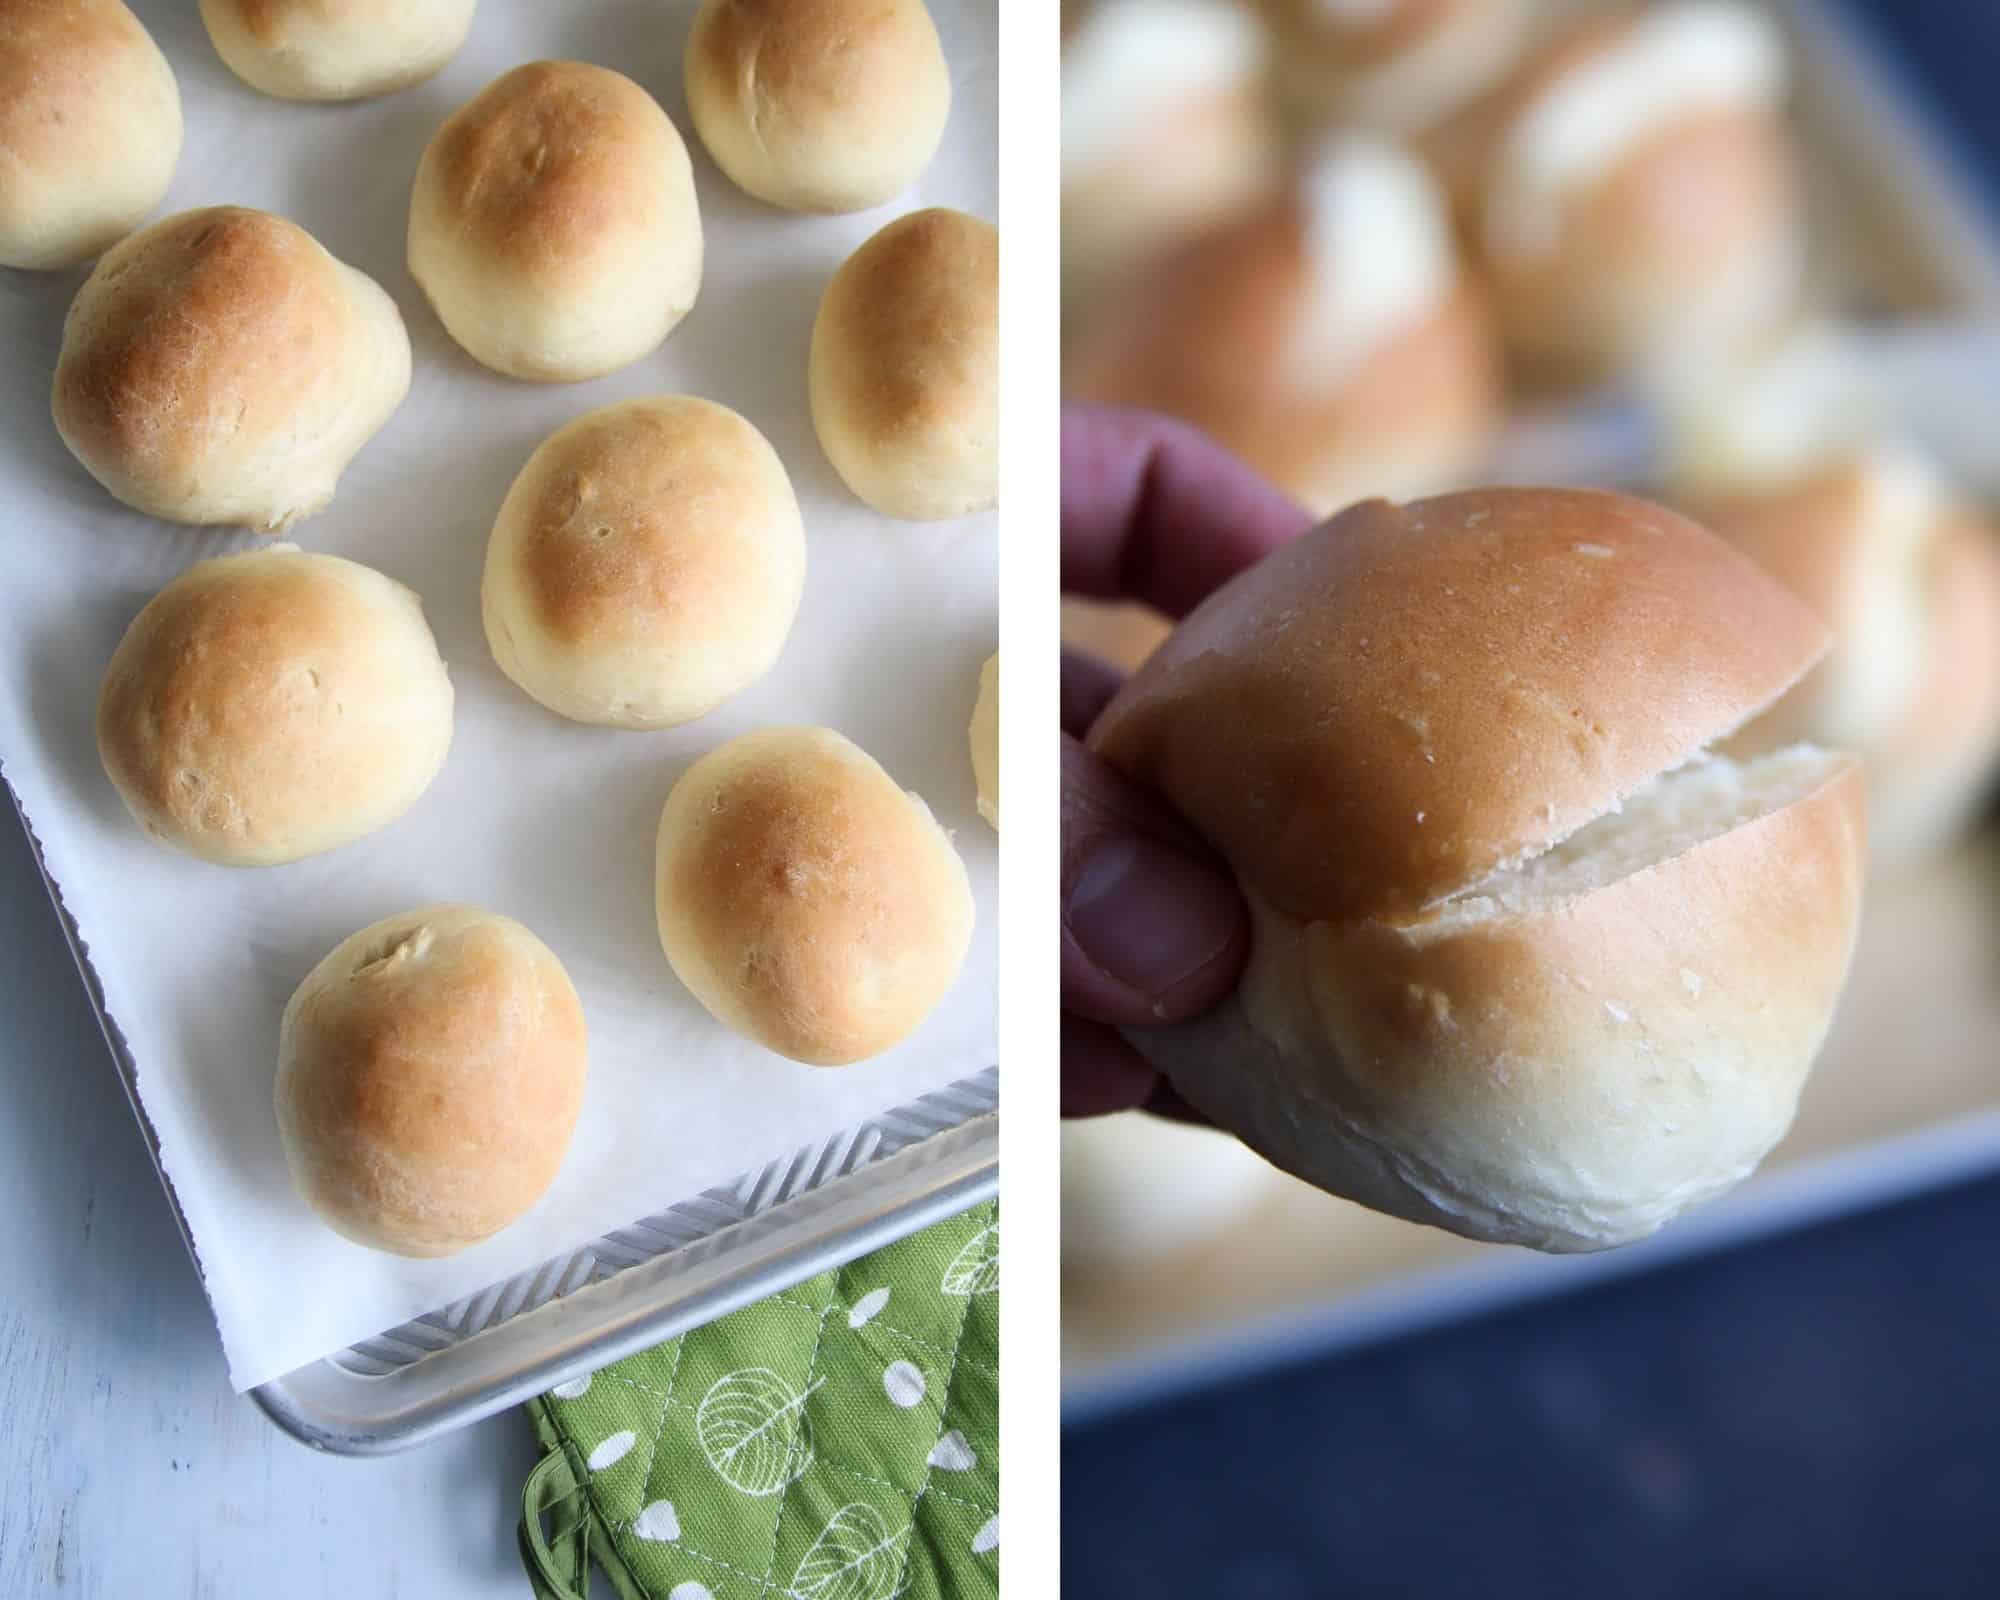 The baked buns, and the sliced buns before filling with the cream.